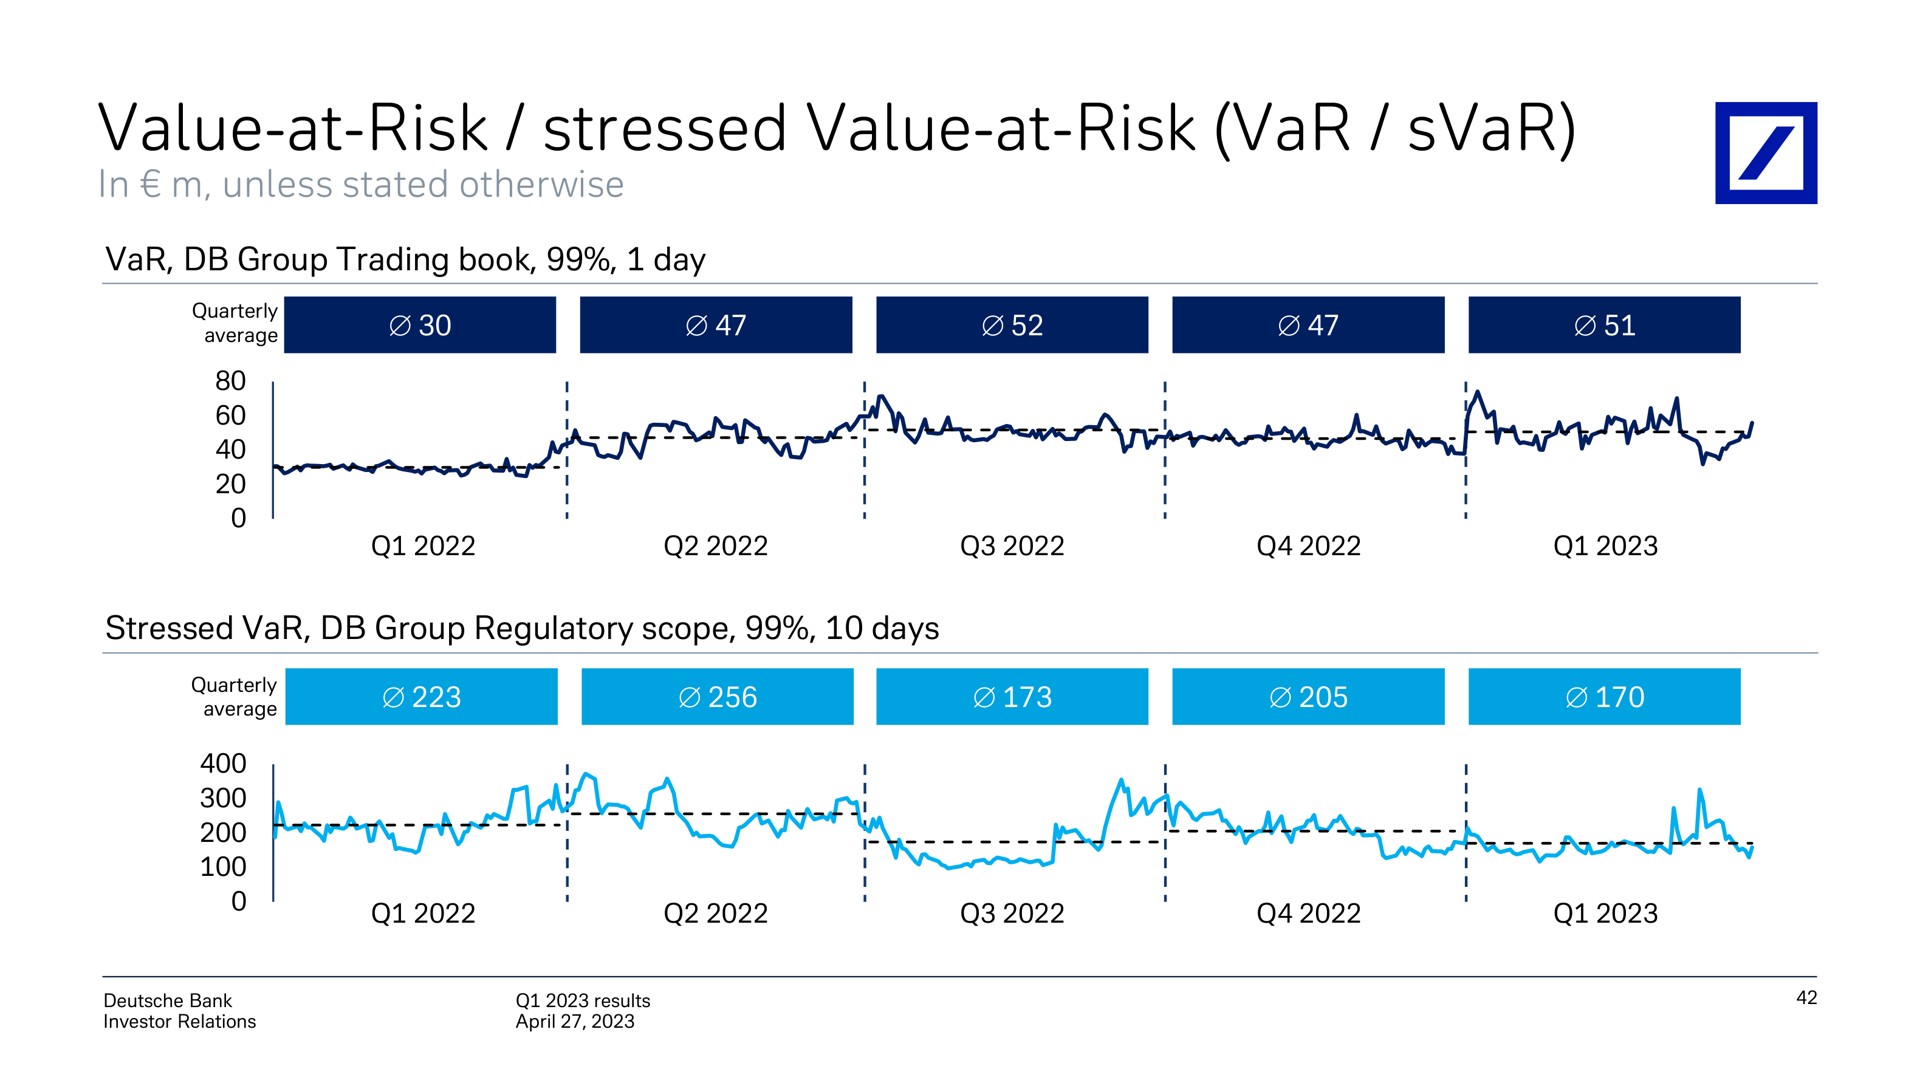 value at risk stressed value at risk cue aes | Deutsche Bank